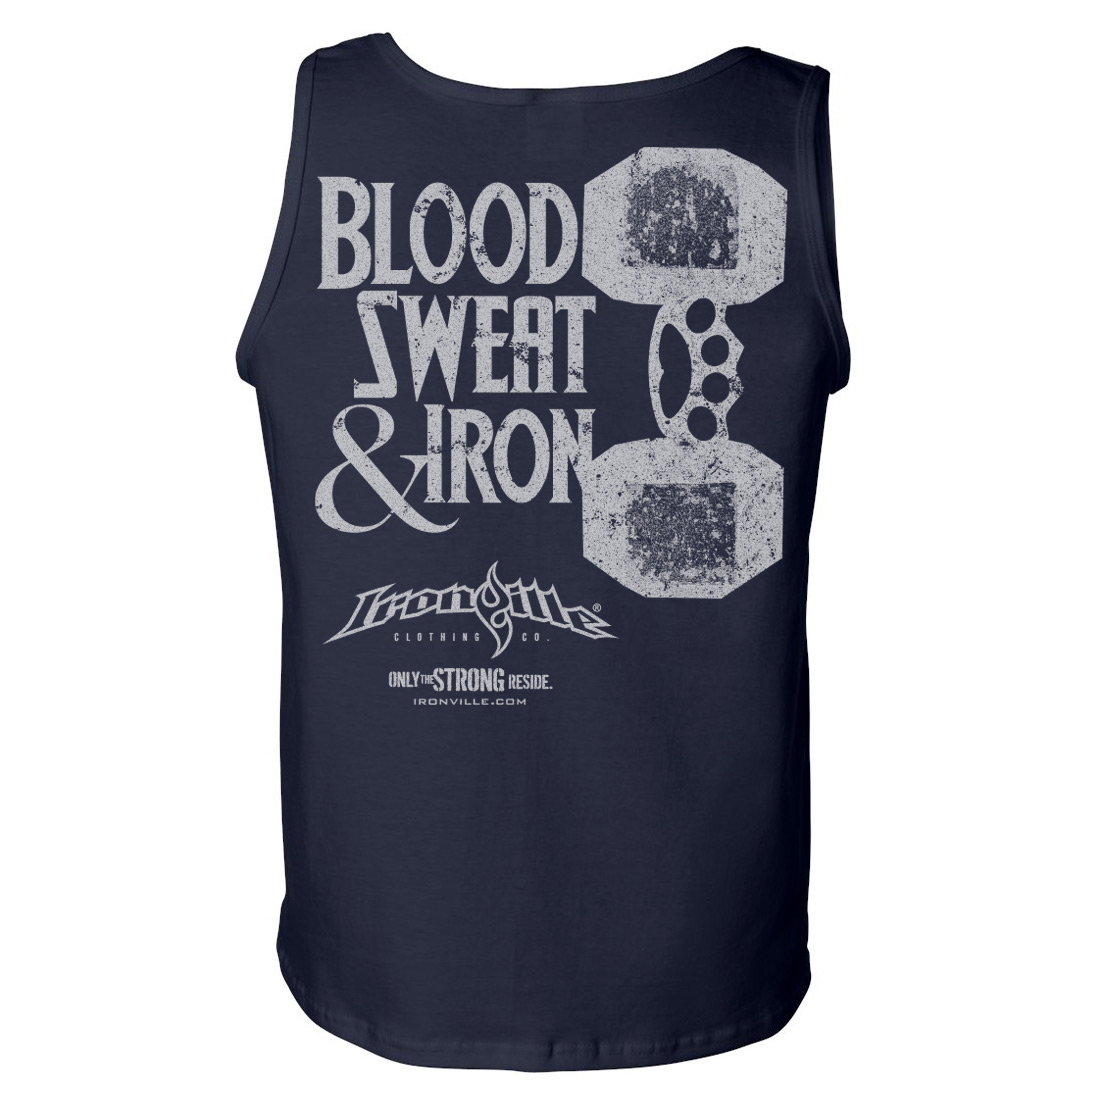 https://www.ironville.com/wp-content/uploads/2015/08/blood-sweat-and-iron-brass-knuckles-dumbbell-weightlifting-tank-top-navy-blue.jpg